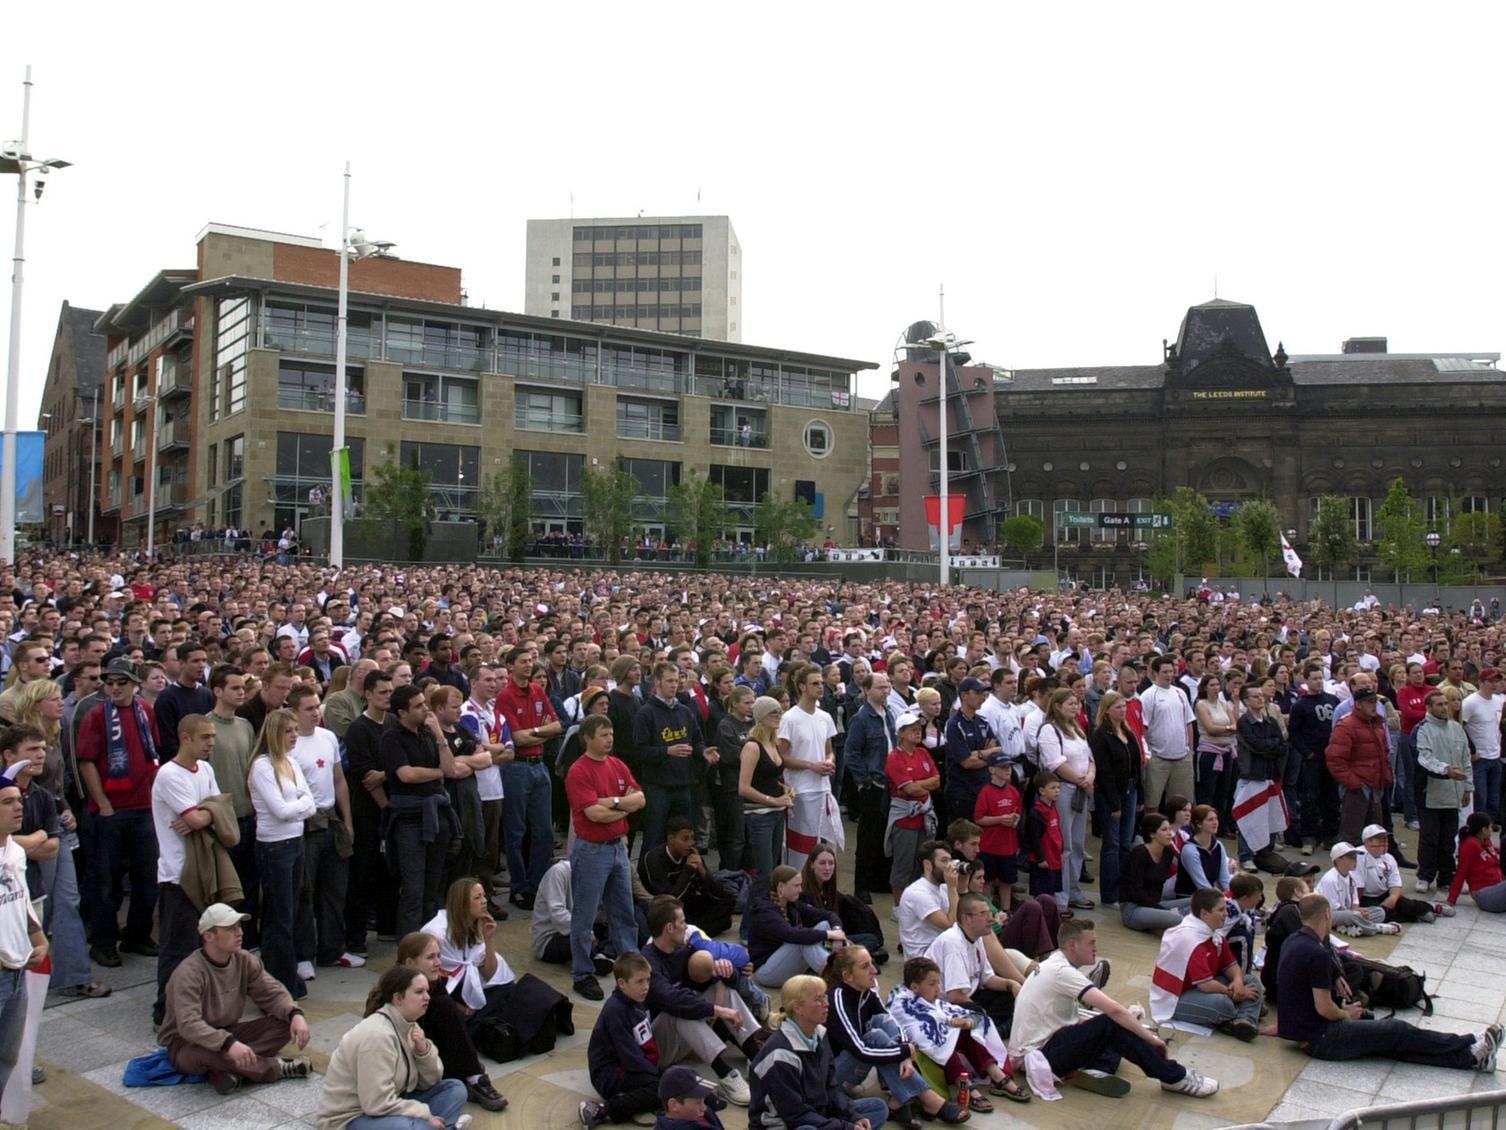 Share your memories of Leeds in 2002 with Andrew Hutchinson via email at : andrew.hutchinson@jpress.co.uk or tweet him - @AndyHutchYPN